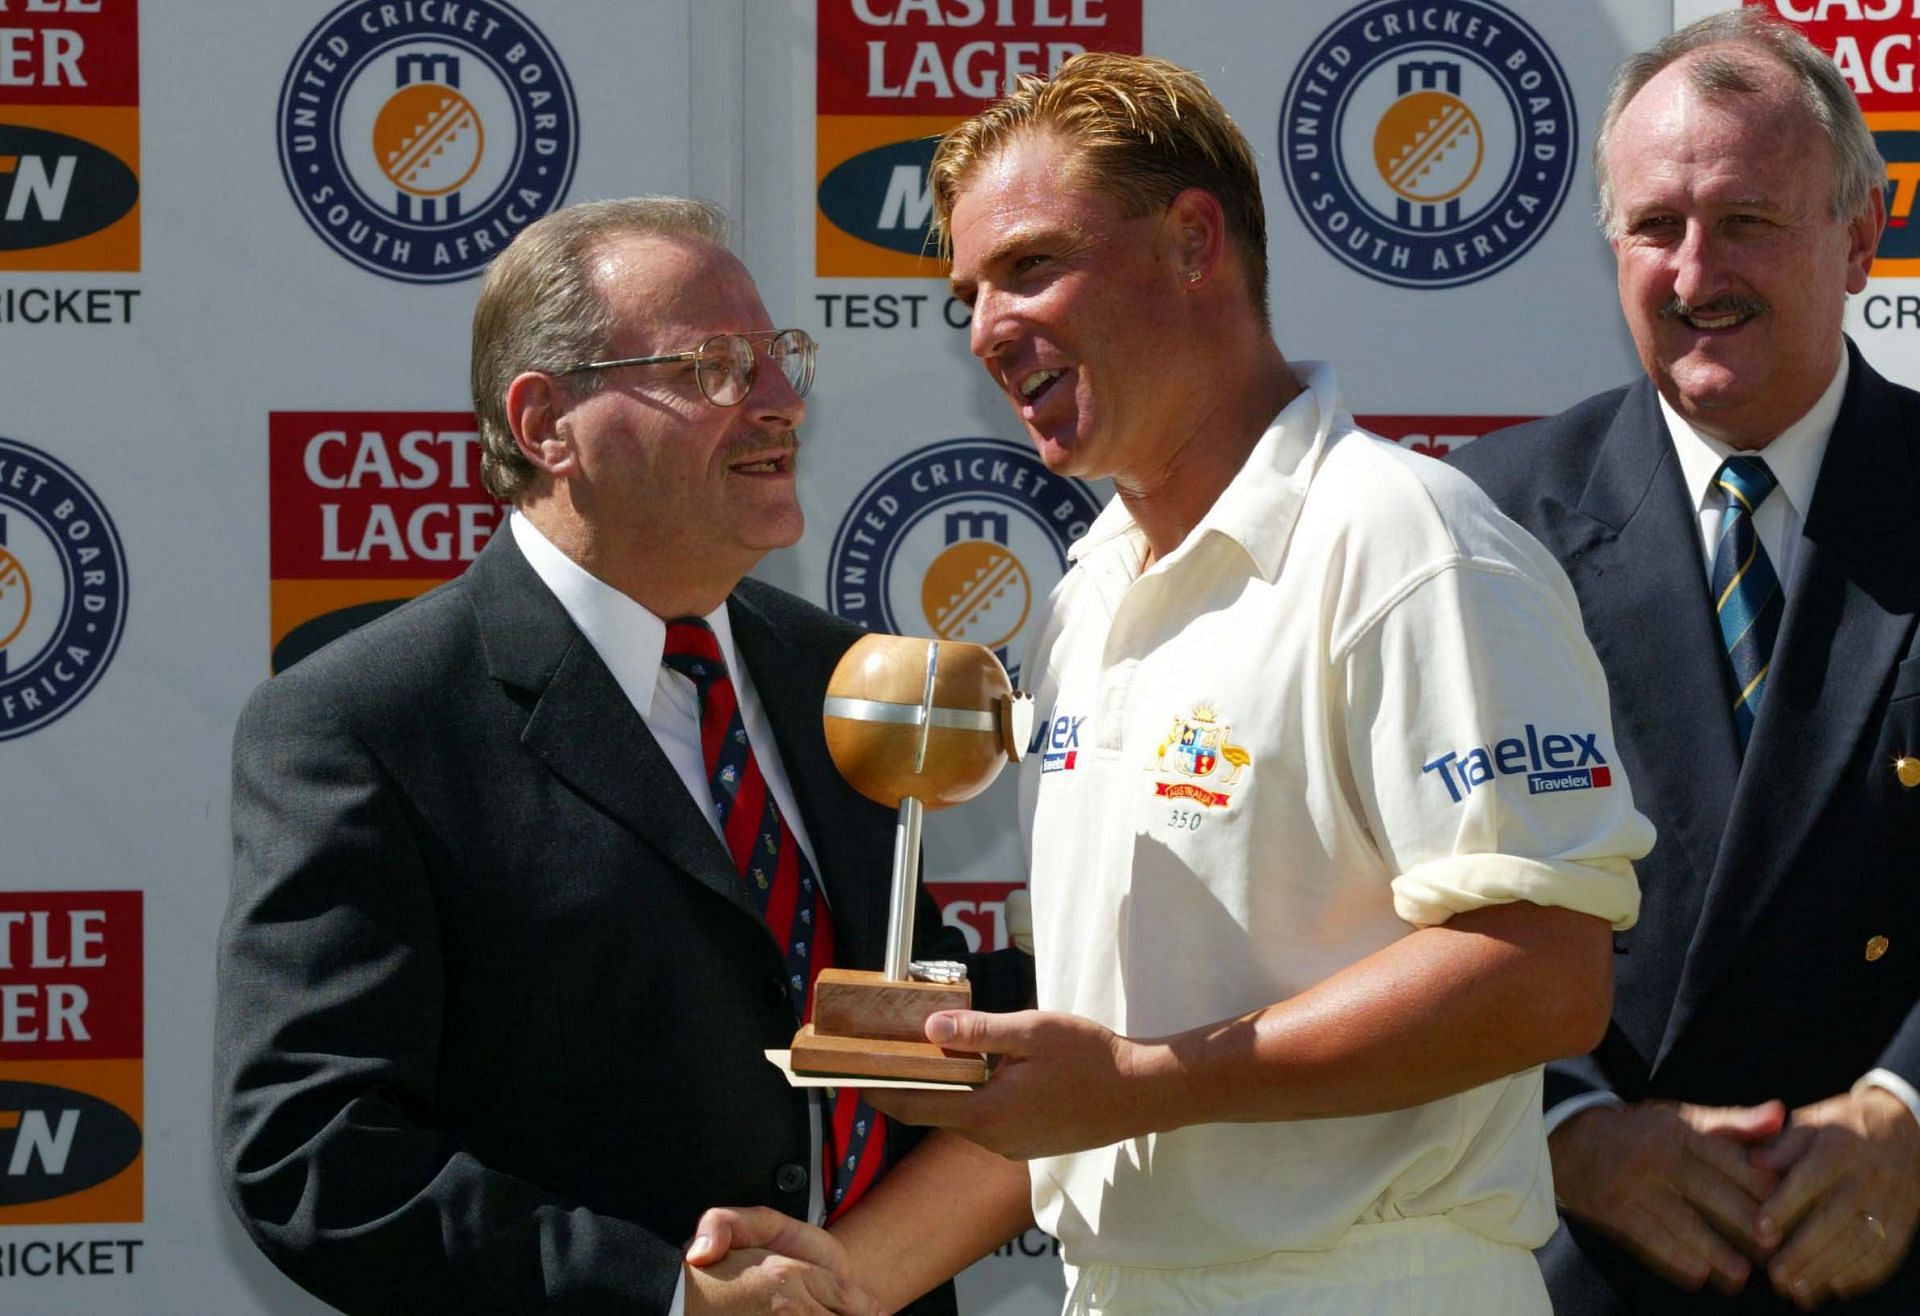 Shane Warne receiving Man of the Match award in his 100th Test